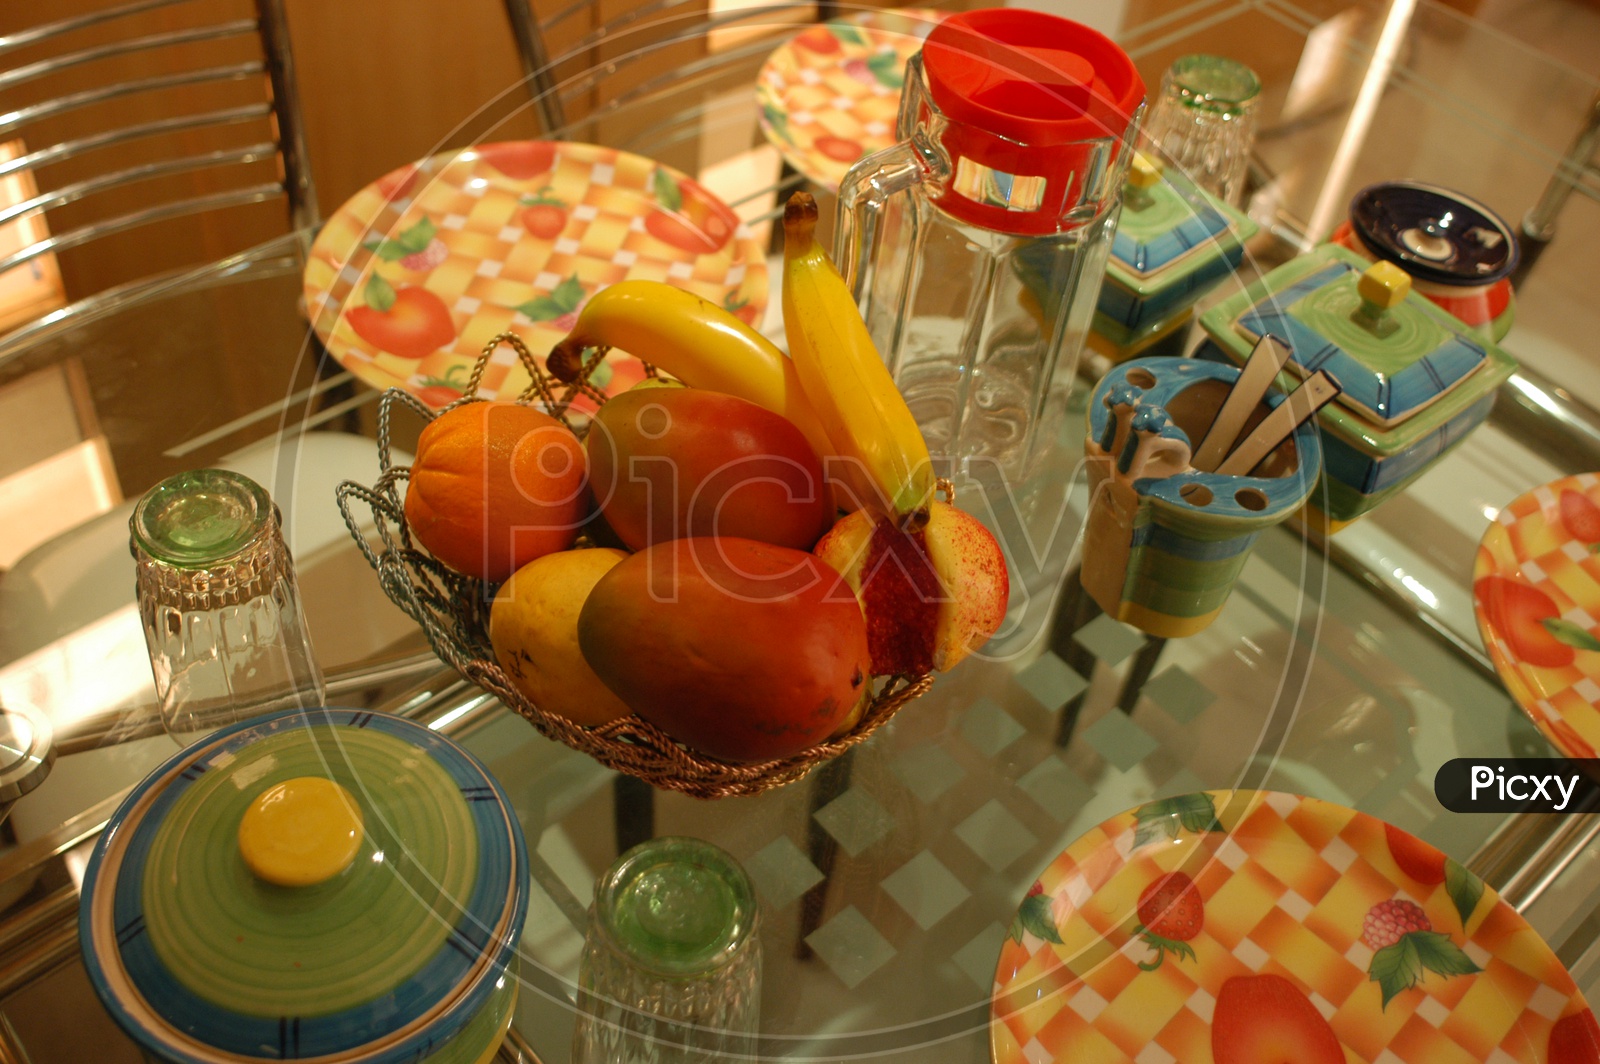 Photograph of artificial fruits in a bowl on dining table